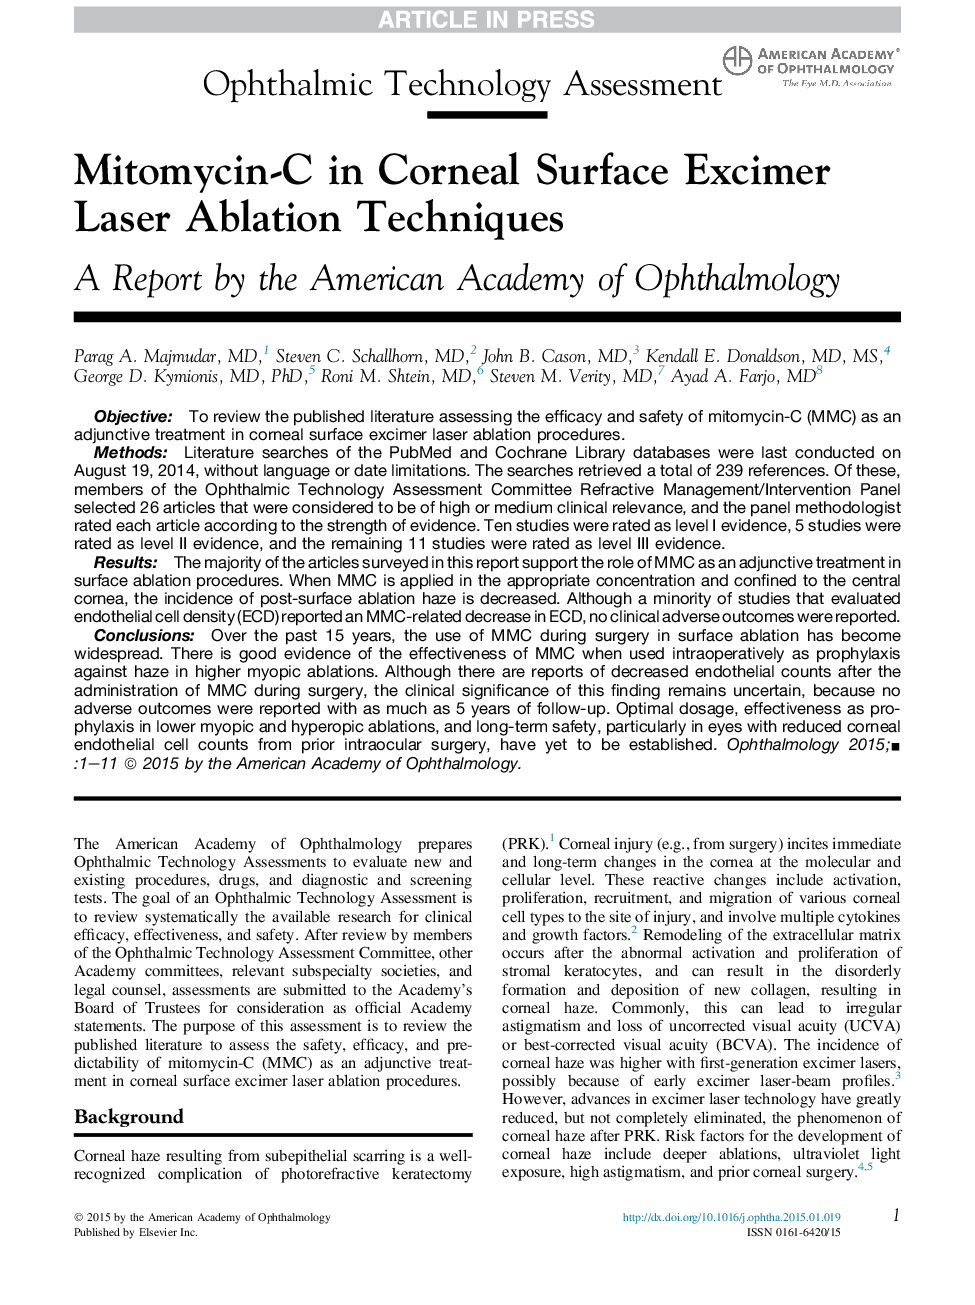 Mitomycin-C in Corneal Surface Excimer Laser Ablation Techniques